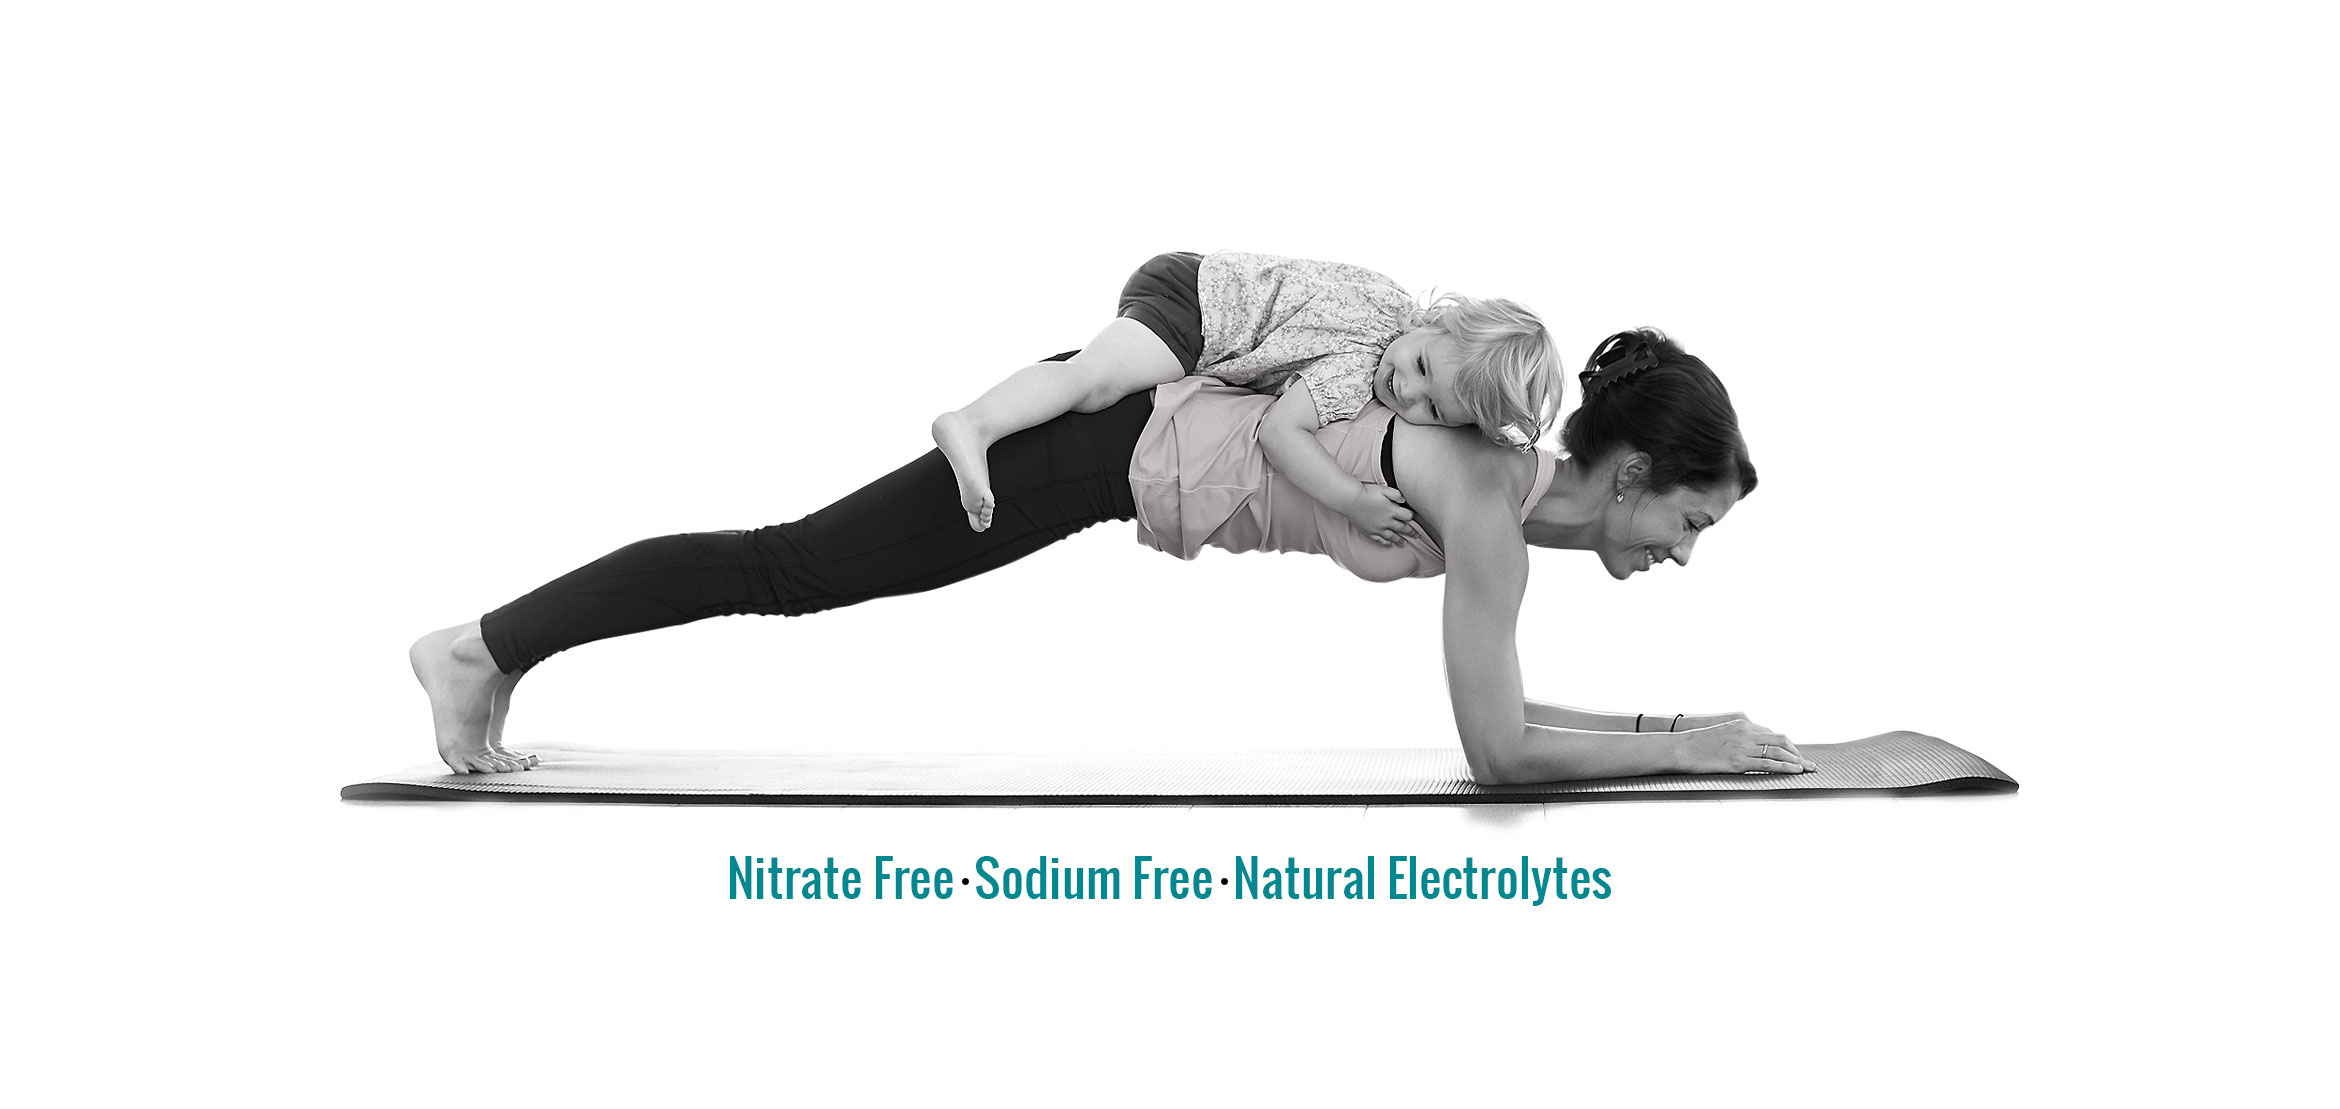 Child resting on his mother’s back, while she does yoga, and the text “Nitrate free, sodium free, natural electrolytes”.